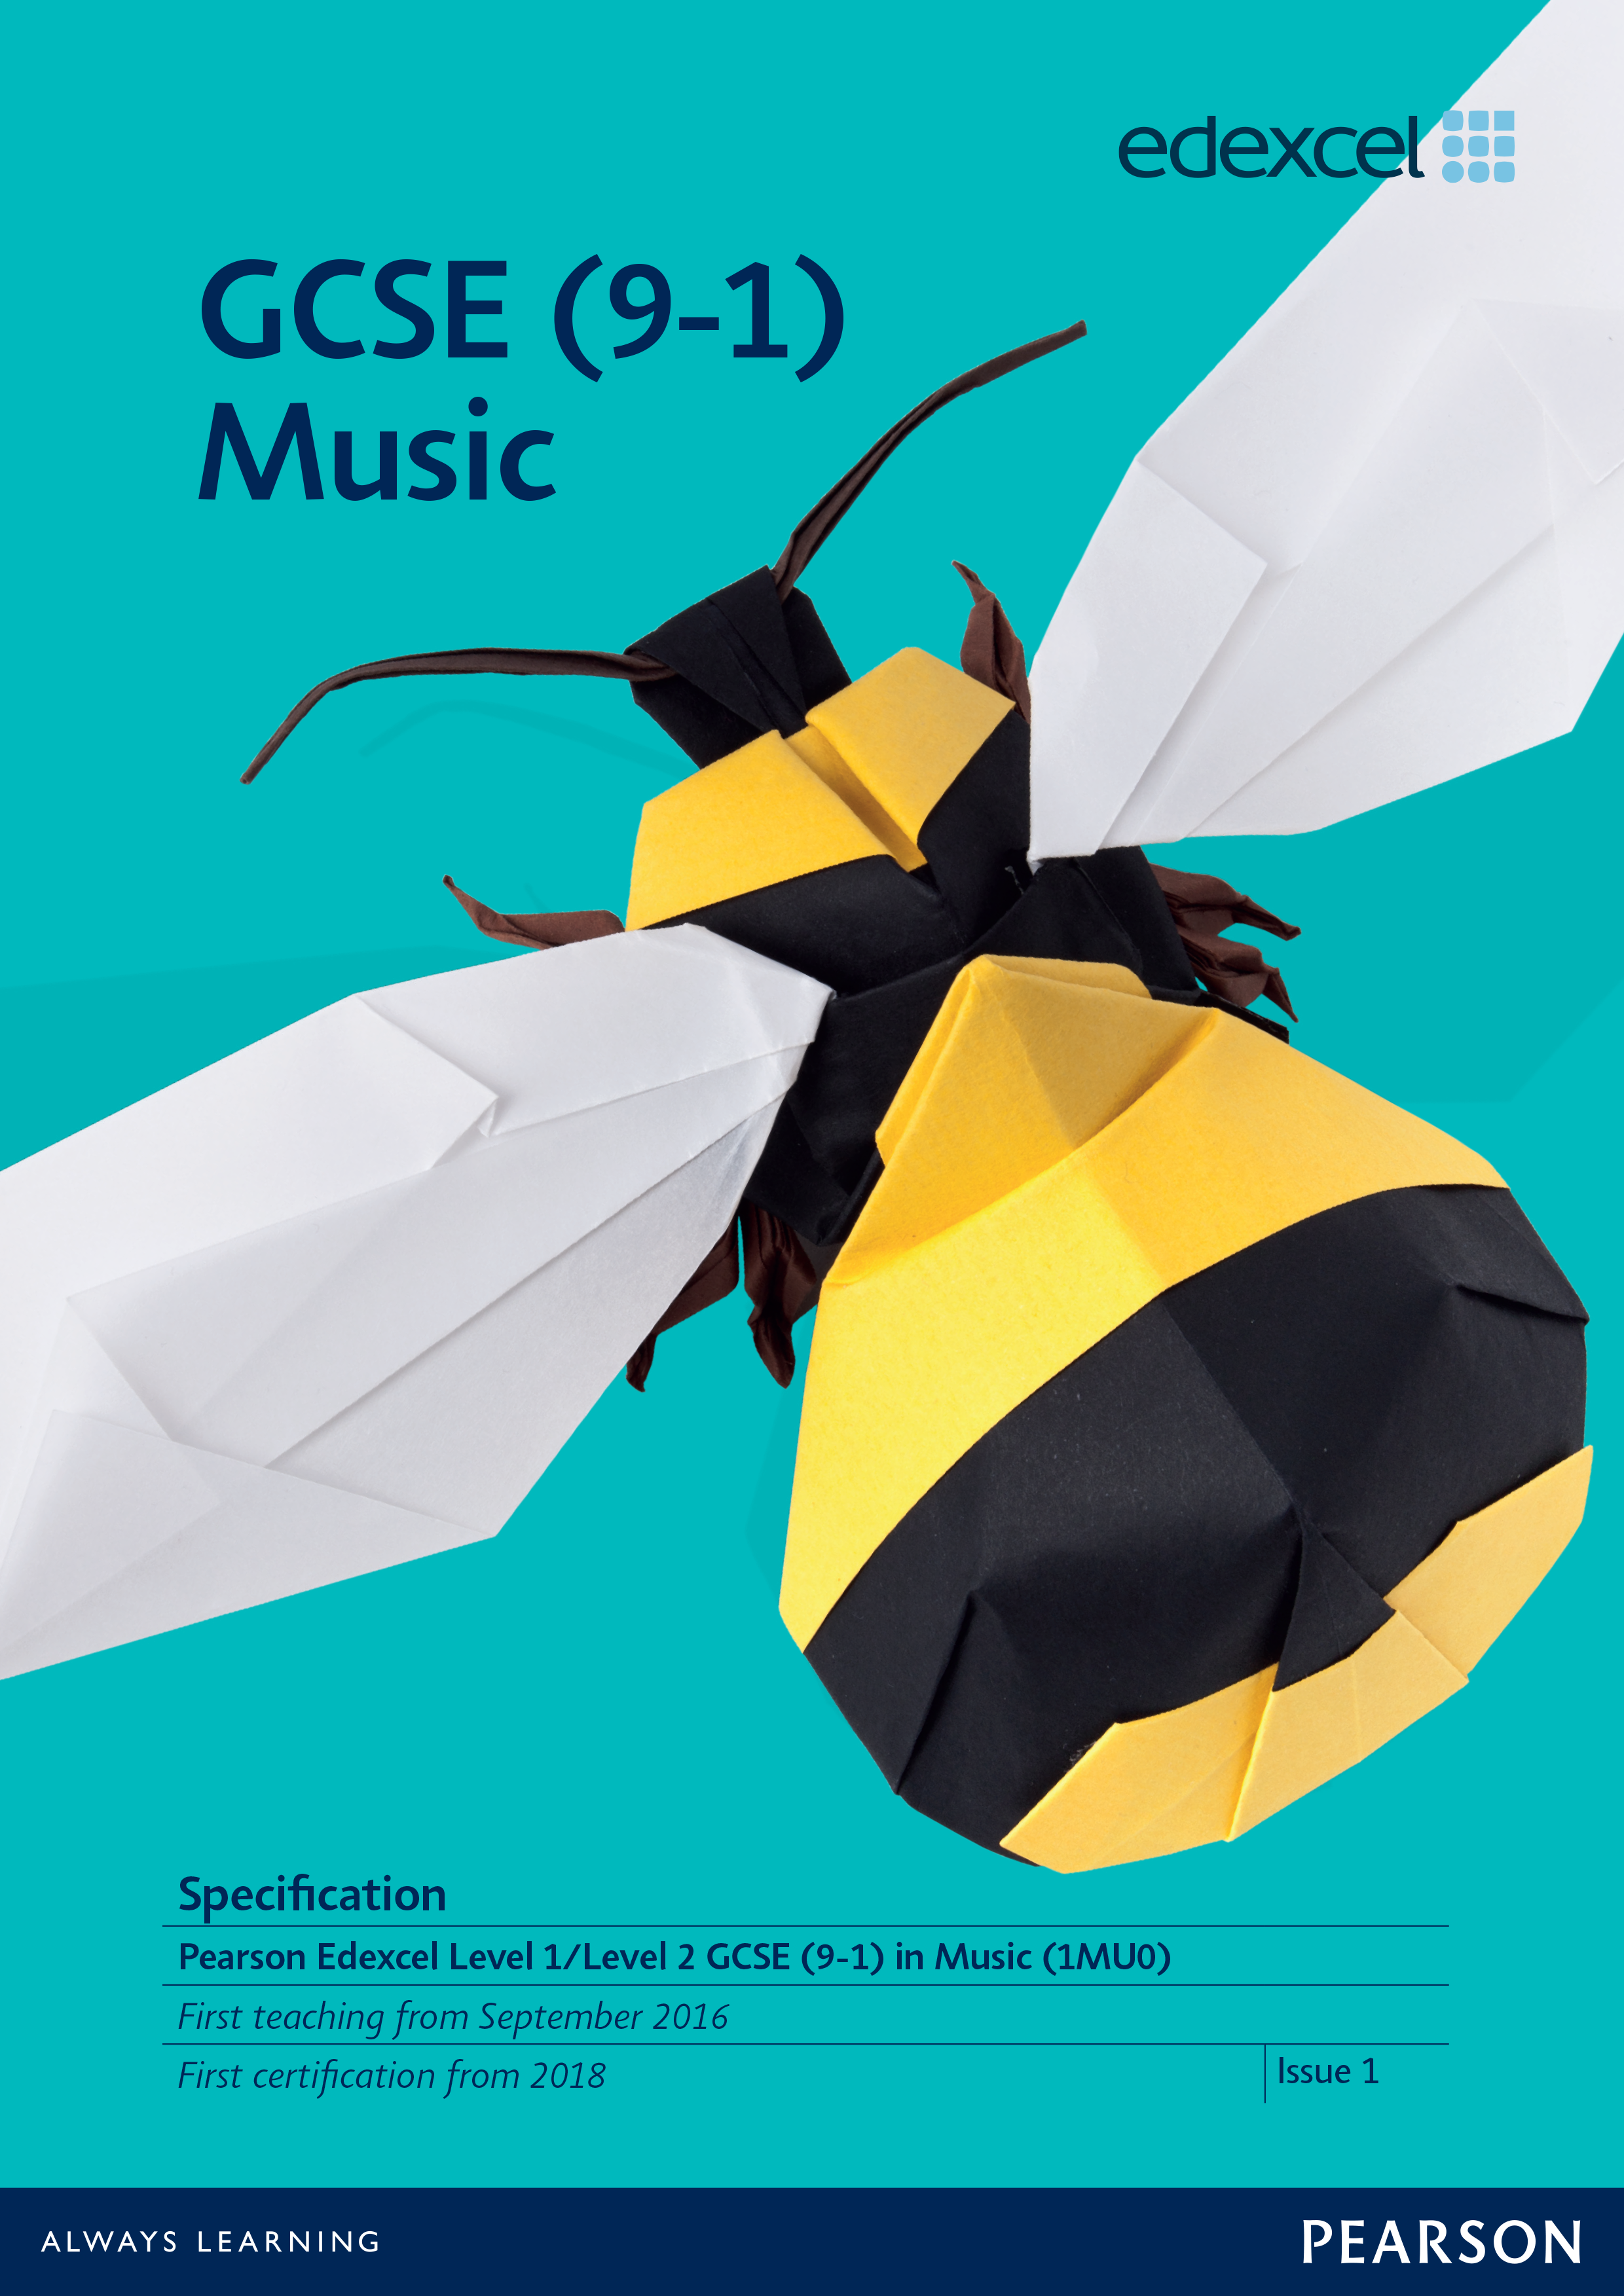 Link to Edexcel GCSE Music (2016) specification page